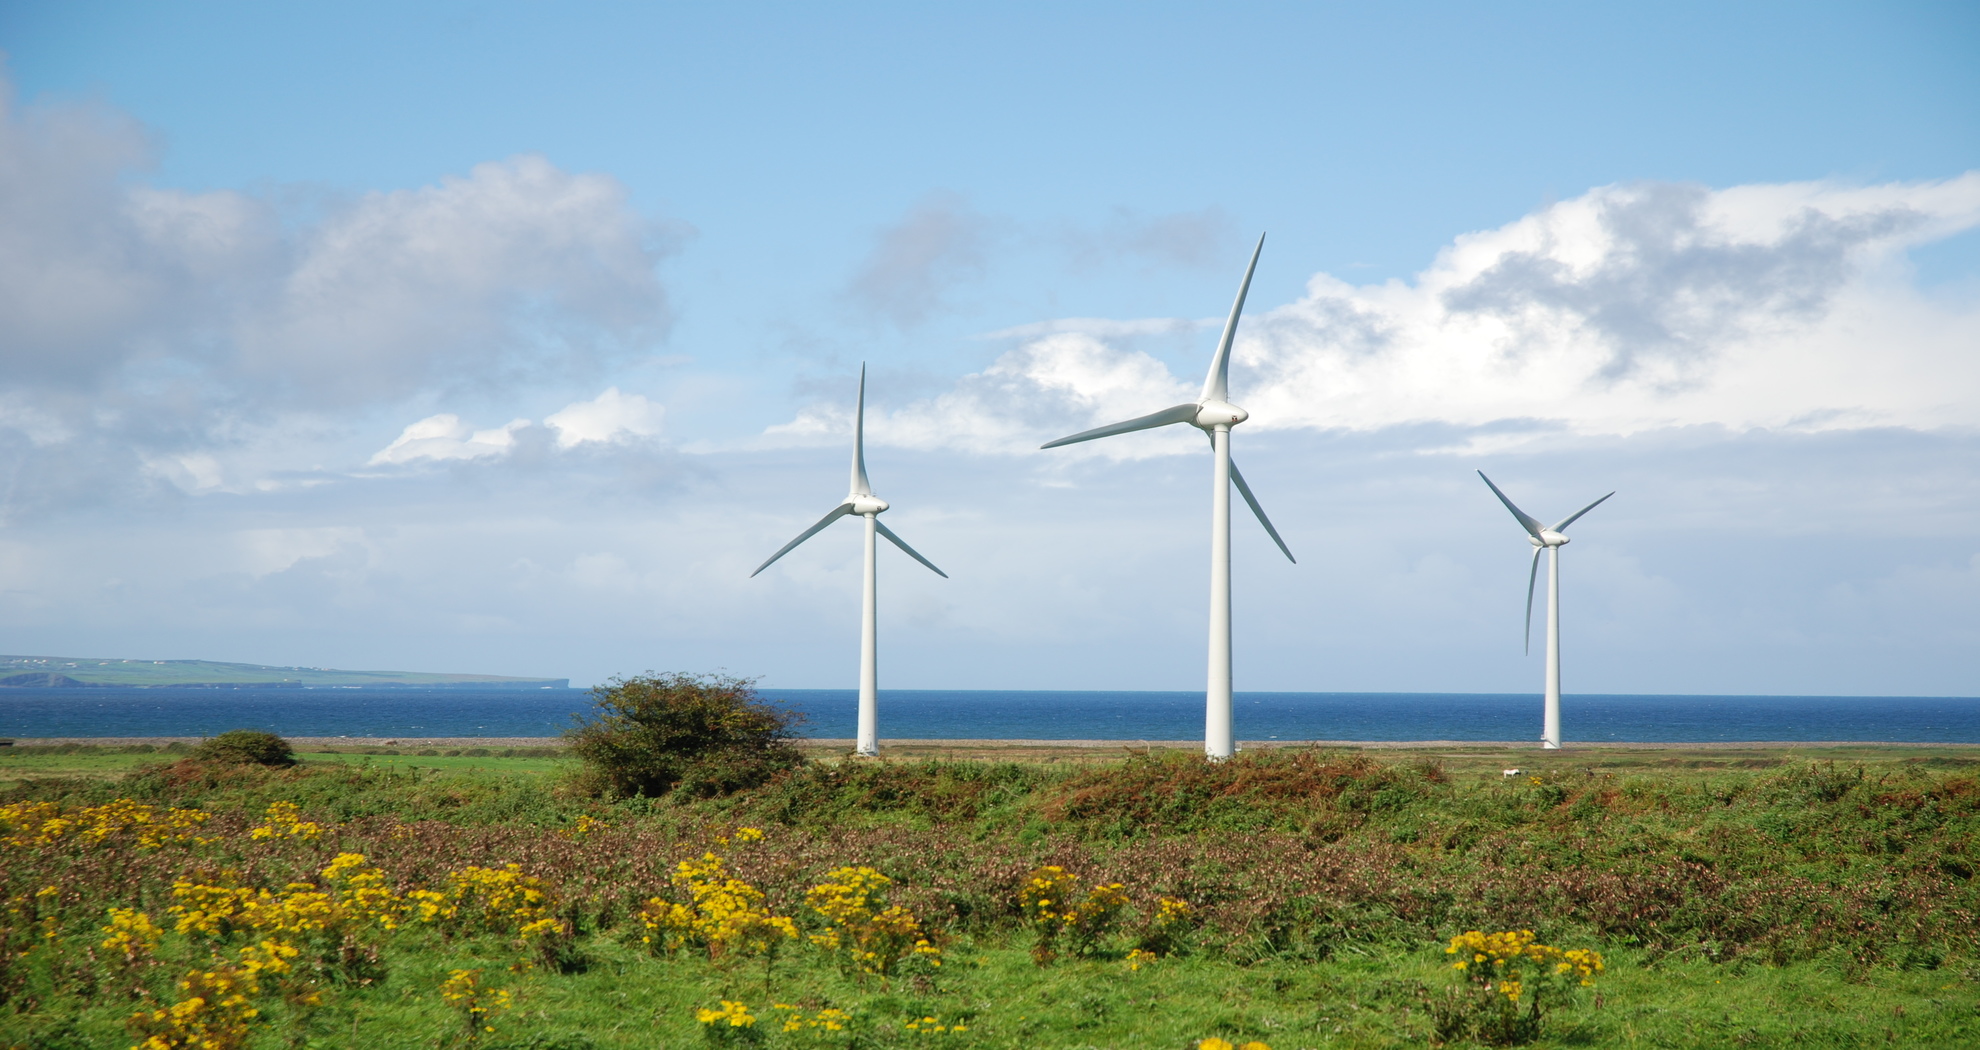 View of wind turbines with the sea in the background